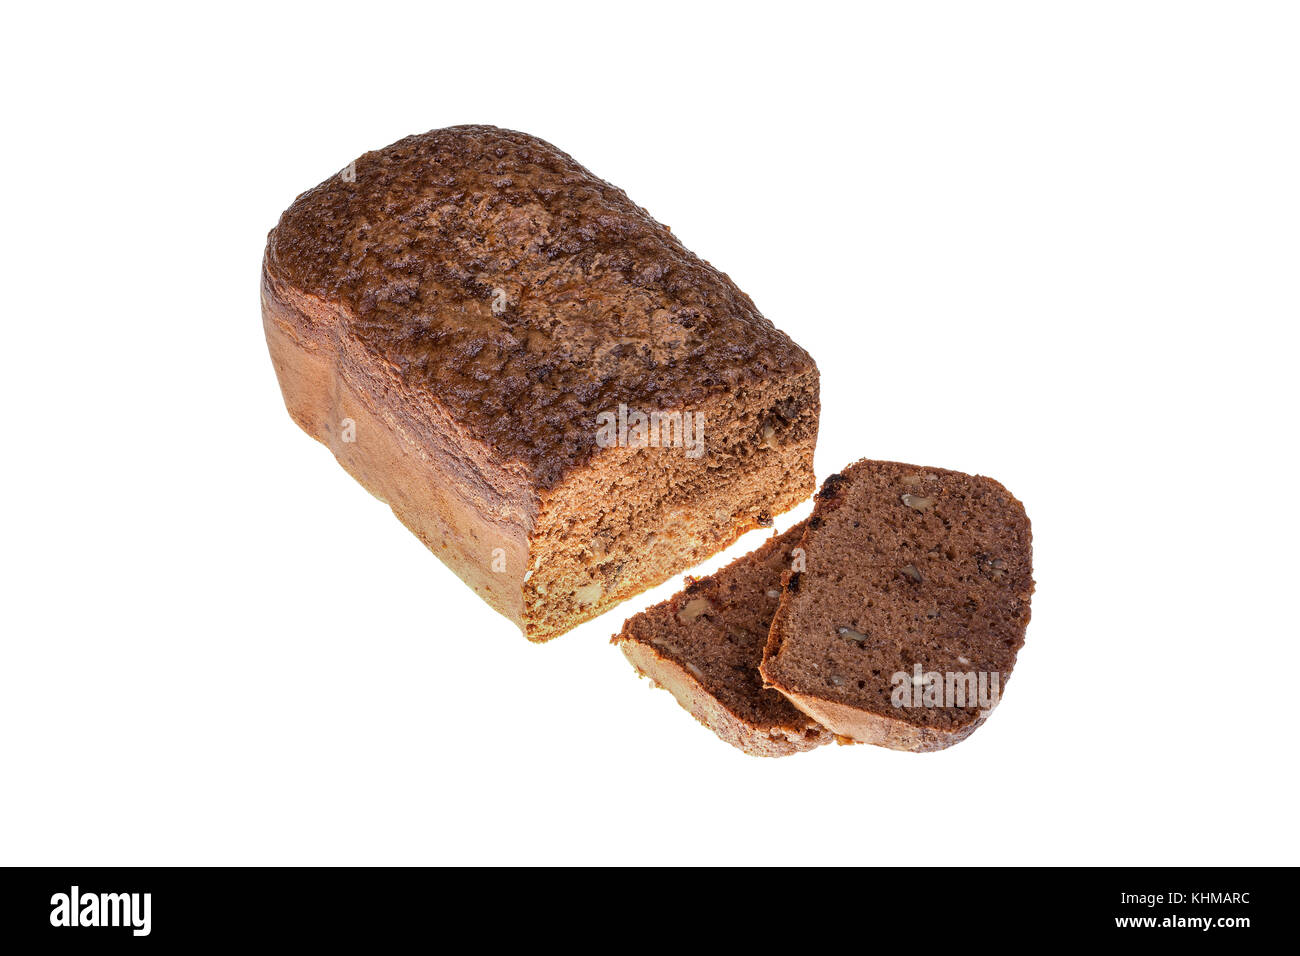 Homemade cocoa cake with walnuts and raisins baked in bread maker isolated on white background. Stock Photo